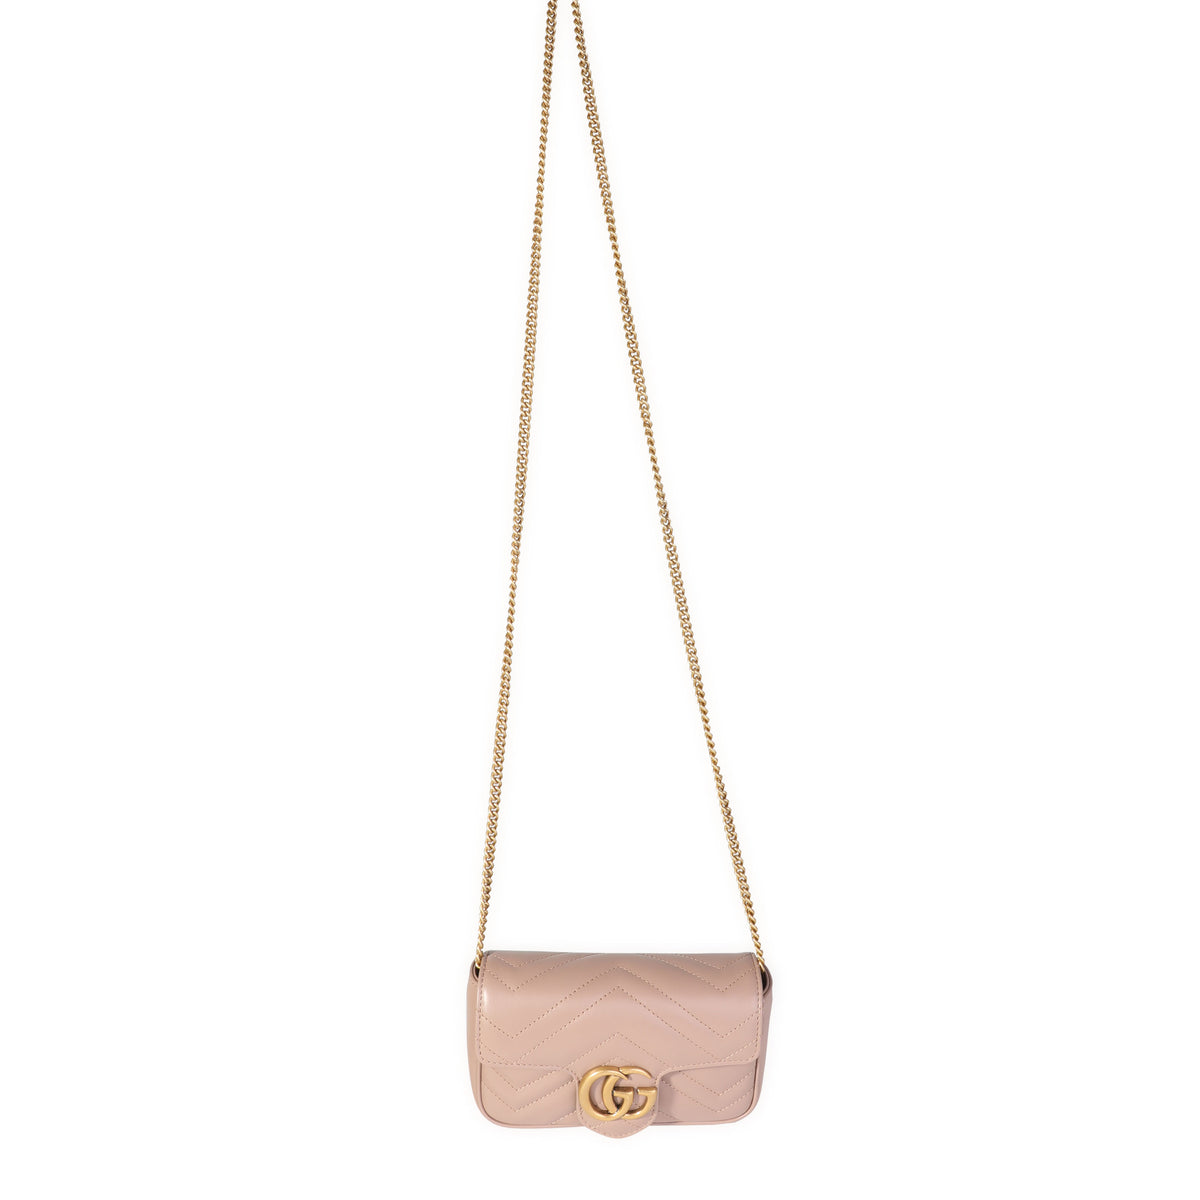 GG Marmont leather super mini bag Dusty pink